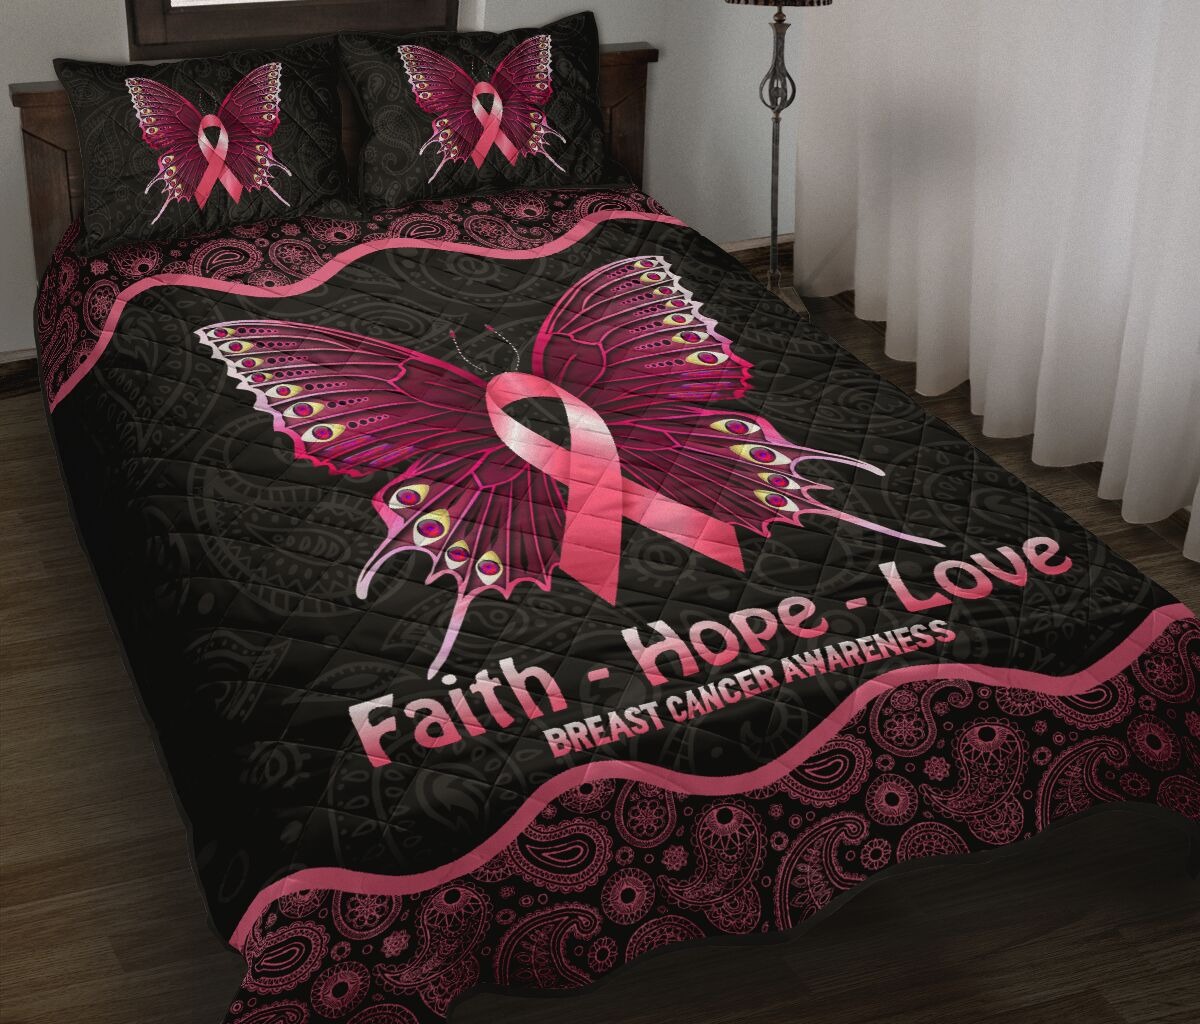 Butterfly faith hope love breast cancer awareness quilt bedding set